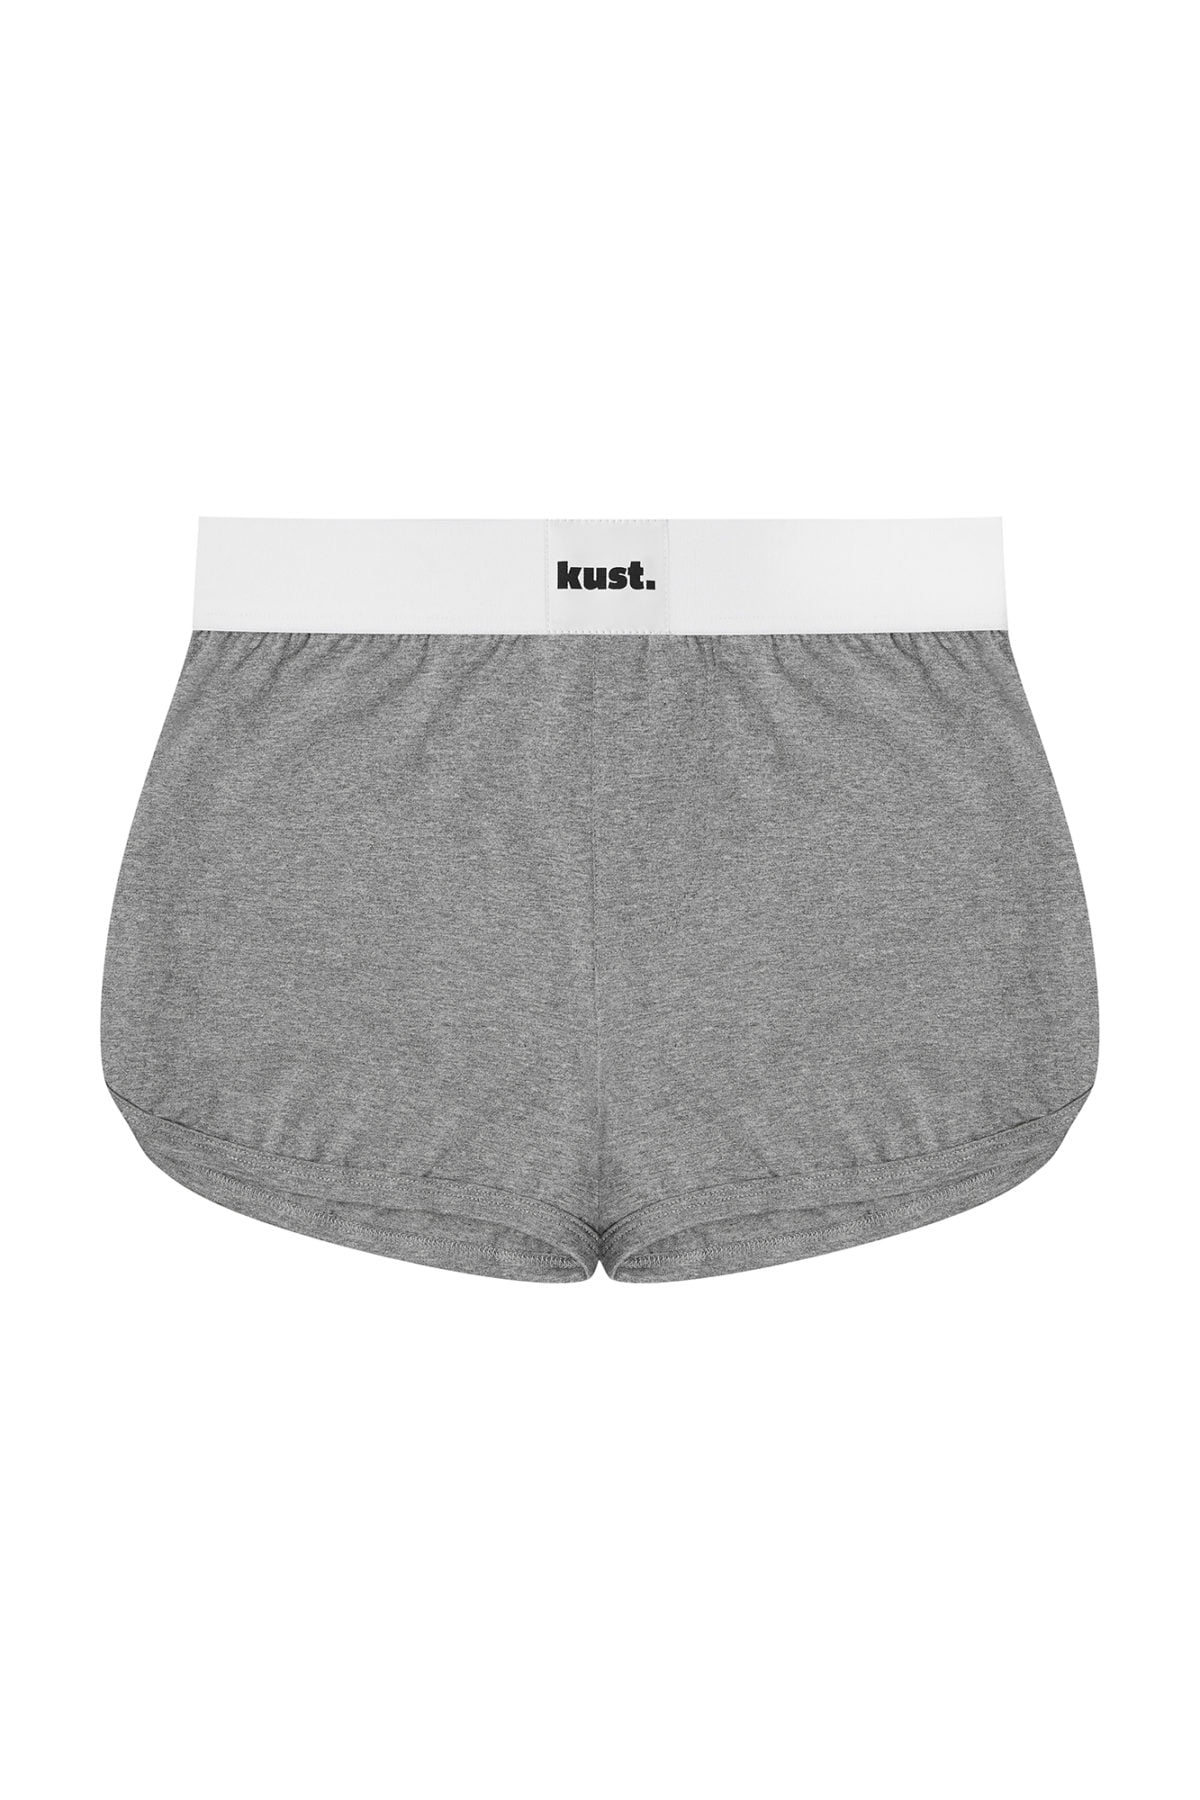 Organic cotton boxer shorts, hybrid of boxer and running shorts. Inspired by 70's classic sport design, translated into modern and comfortable undergarment.